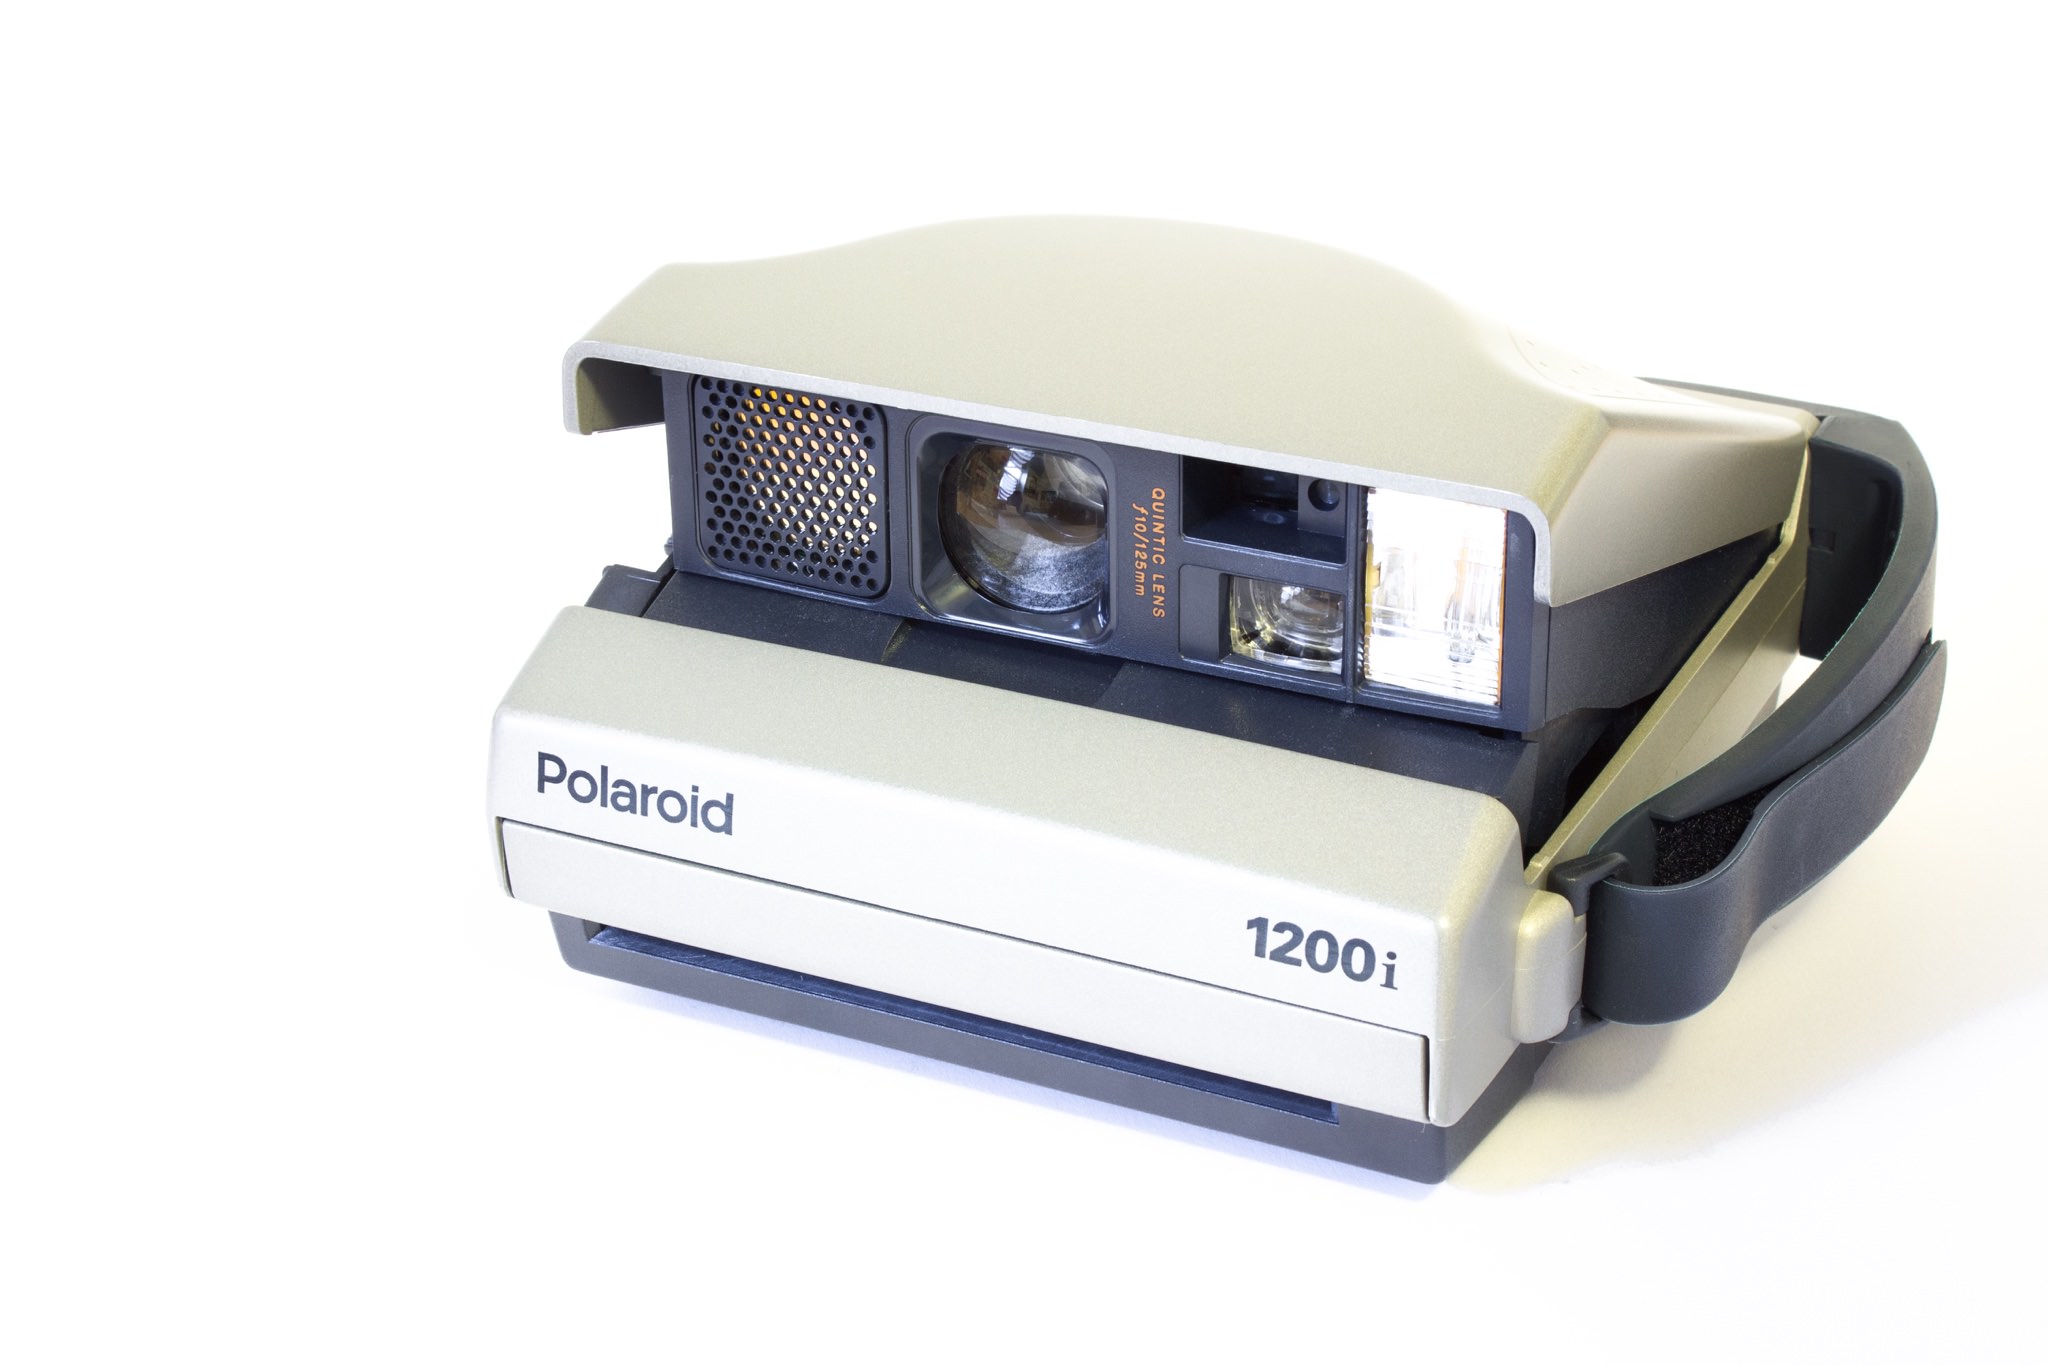 Polaroid Spectra 1200i | Guide for the instant camera